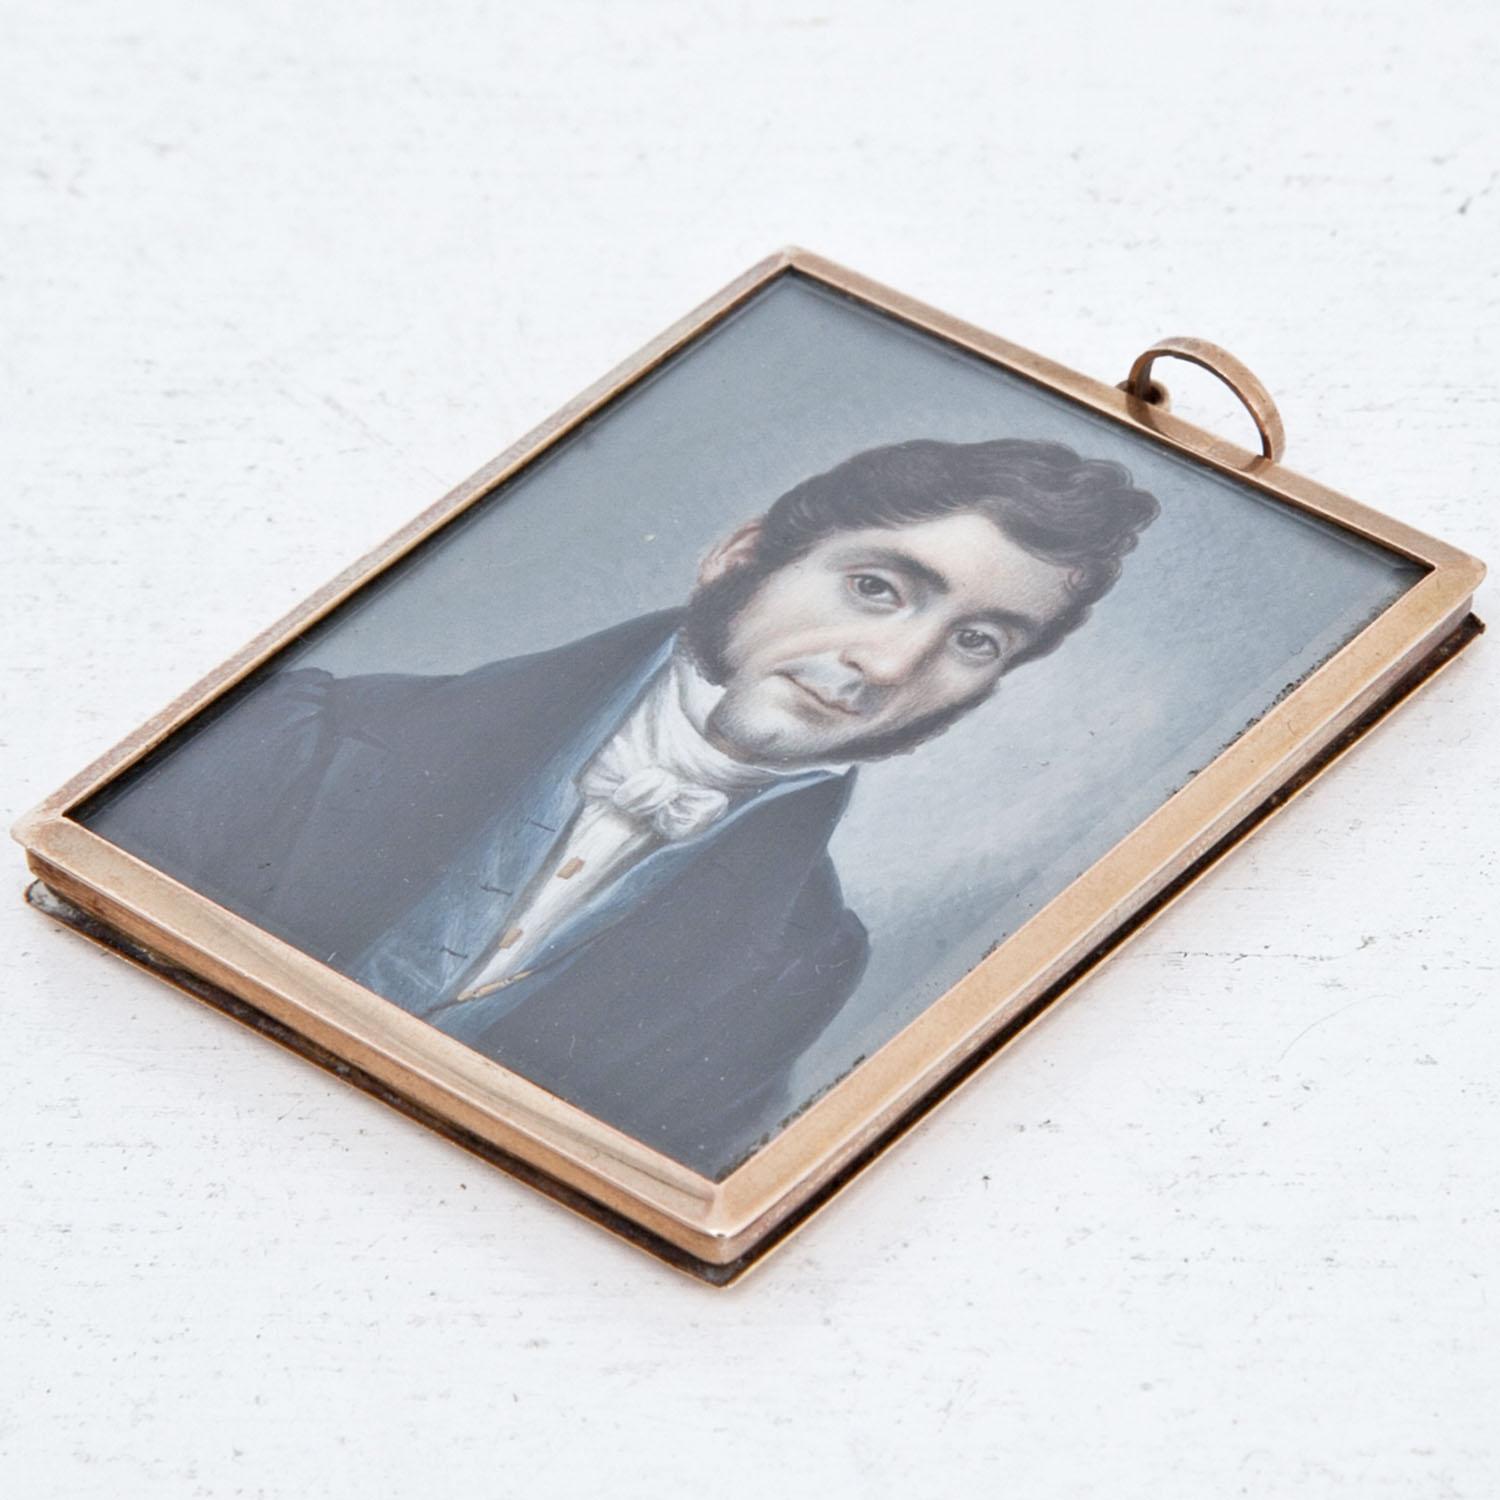 Rectangular miniature painting of a gentleman in Biedermeier clothes, with brown curly hair in front of a grey background. Brass frame.